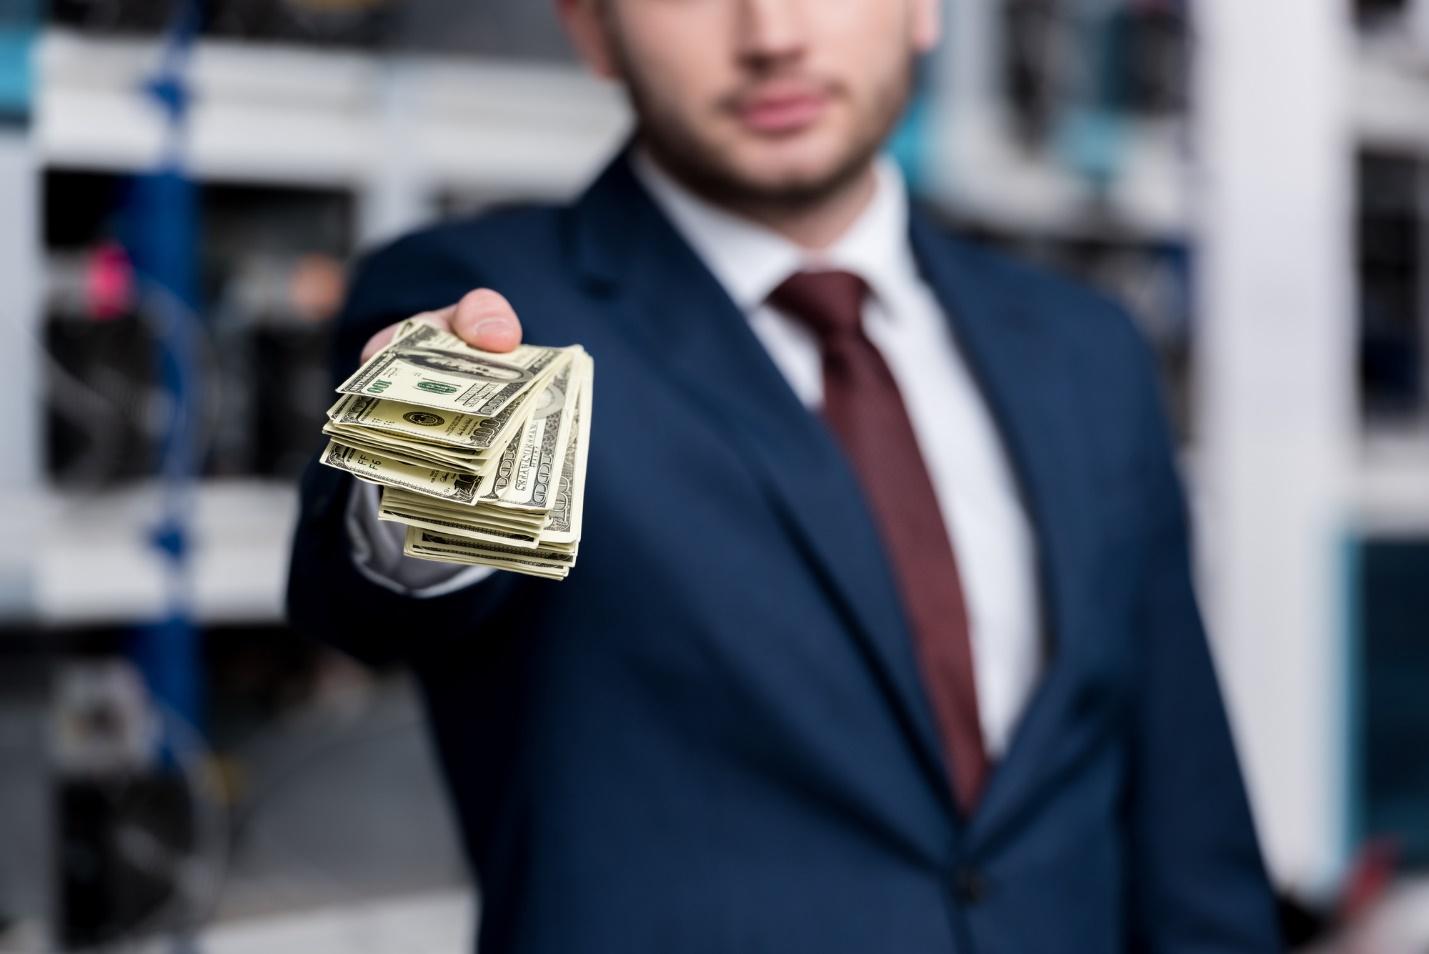 A person in a suit holding money

Description automatically generated